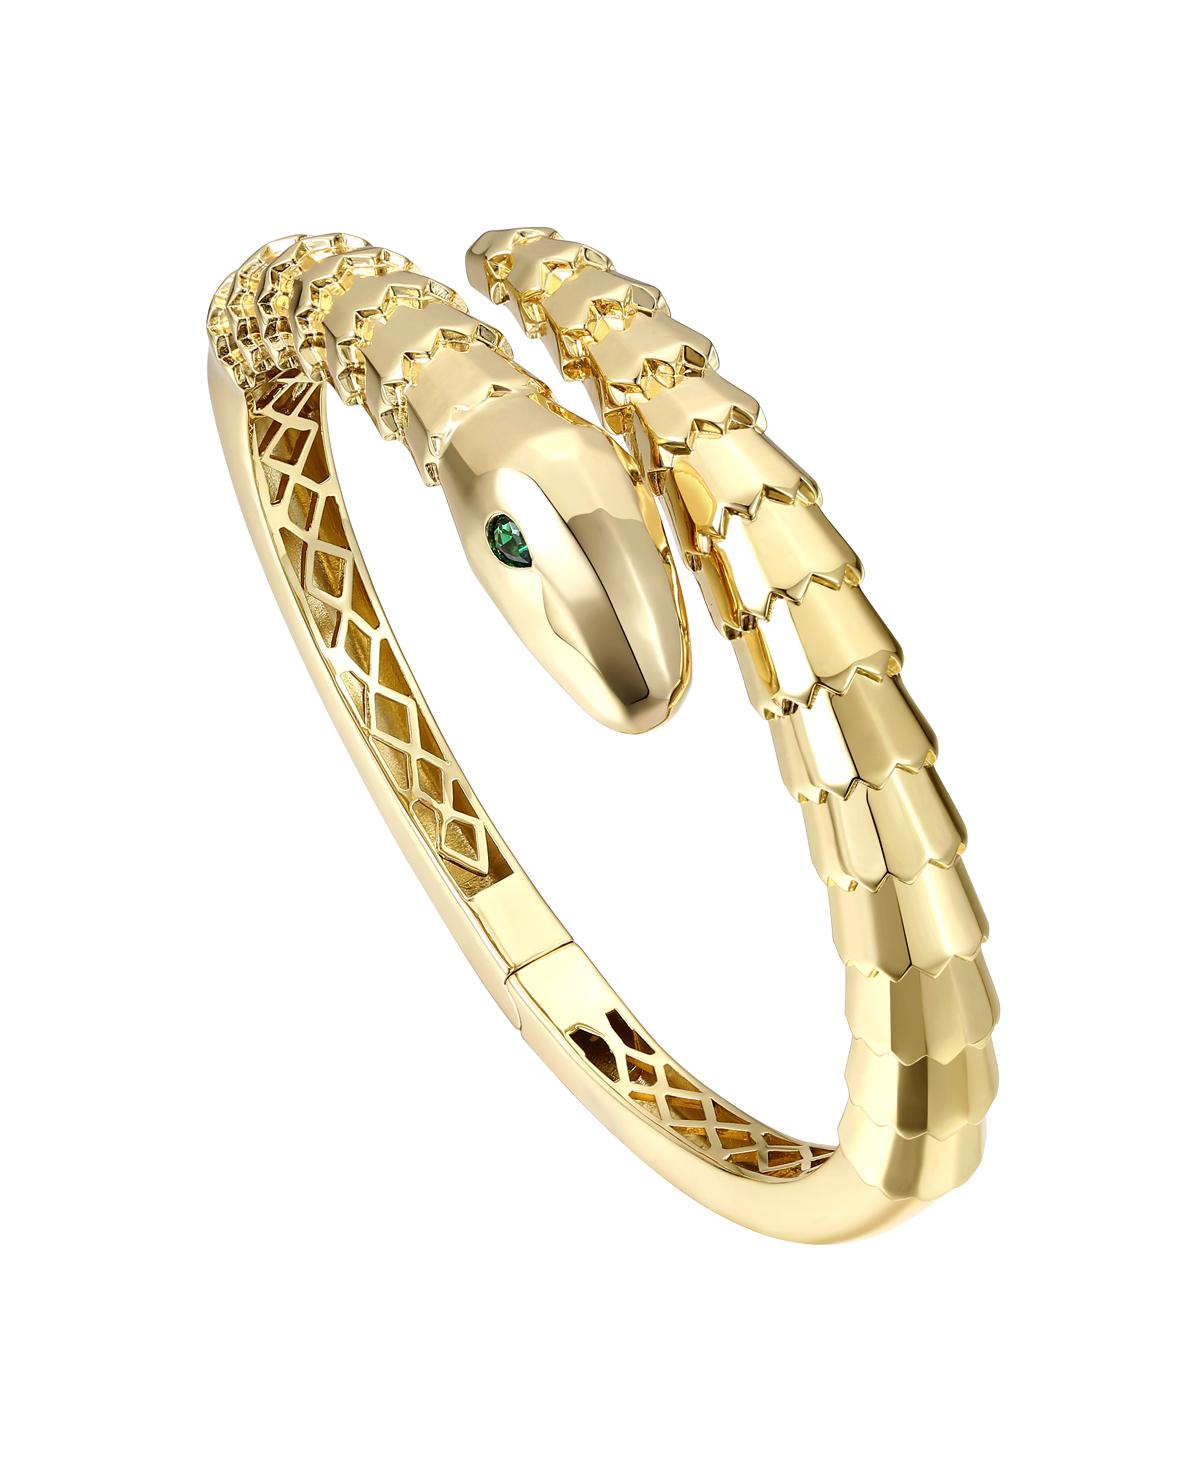 RACHEL GLAUBER 14K GOLD PLATED WITH EMERALD CUBIC ZIRCONIA TEXTURED COILED SERPENT BYPASS BANGLE BRACELET